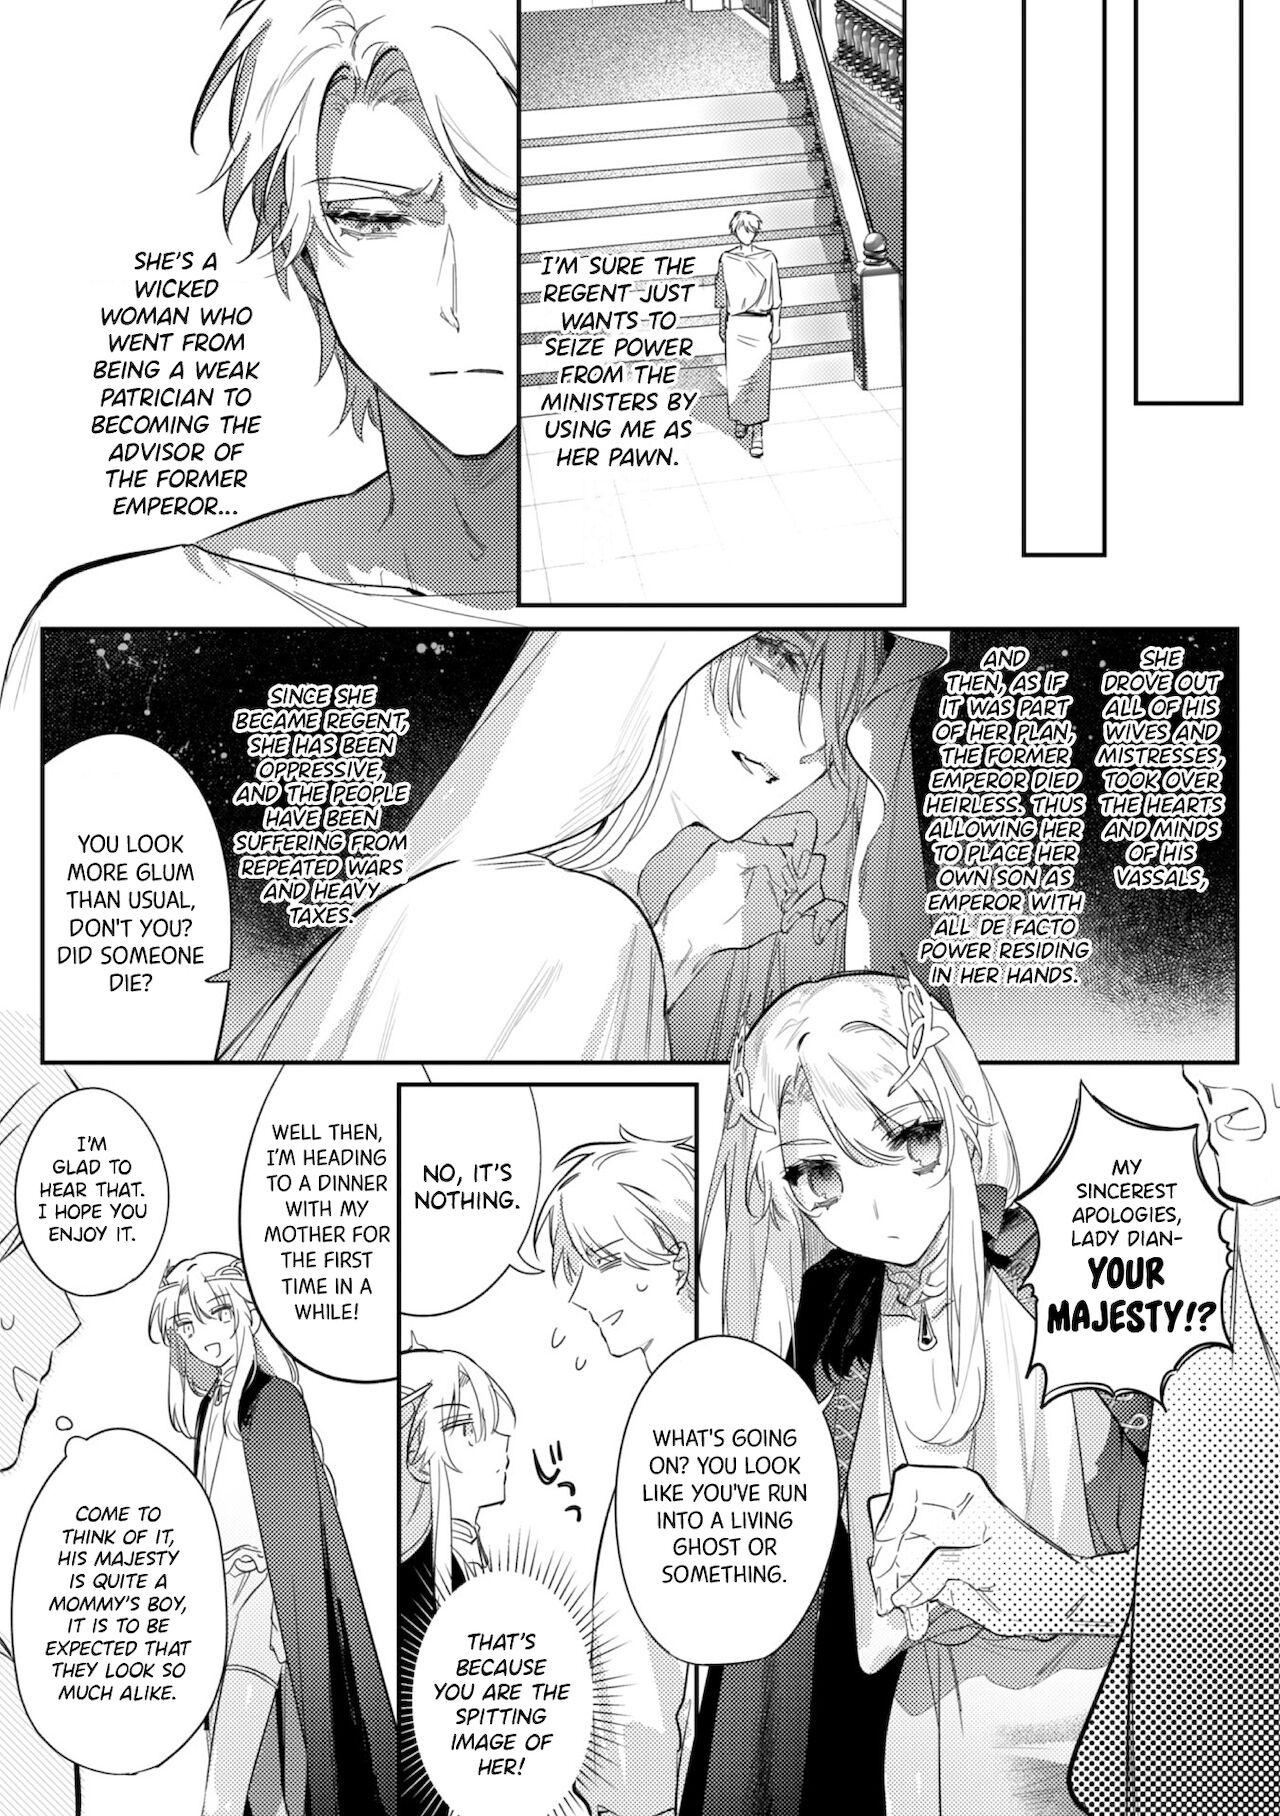 Topless [Hagiyoshi] Intou Kyuuteishi ~Intei to Yobareta Bishounen~ Ch. 3 | Records of the Lascivious Court ~The Beautiful Boy Who Was Called the “Licentious Emperor”~ Ch. 3 [English] [Black Grimoires] Pica - Page 3